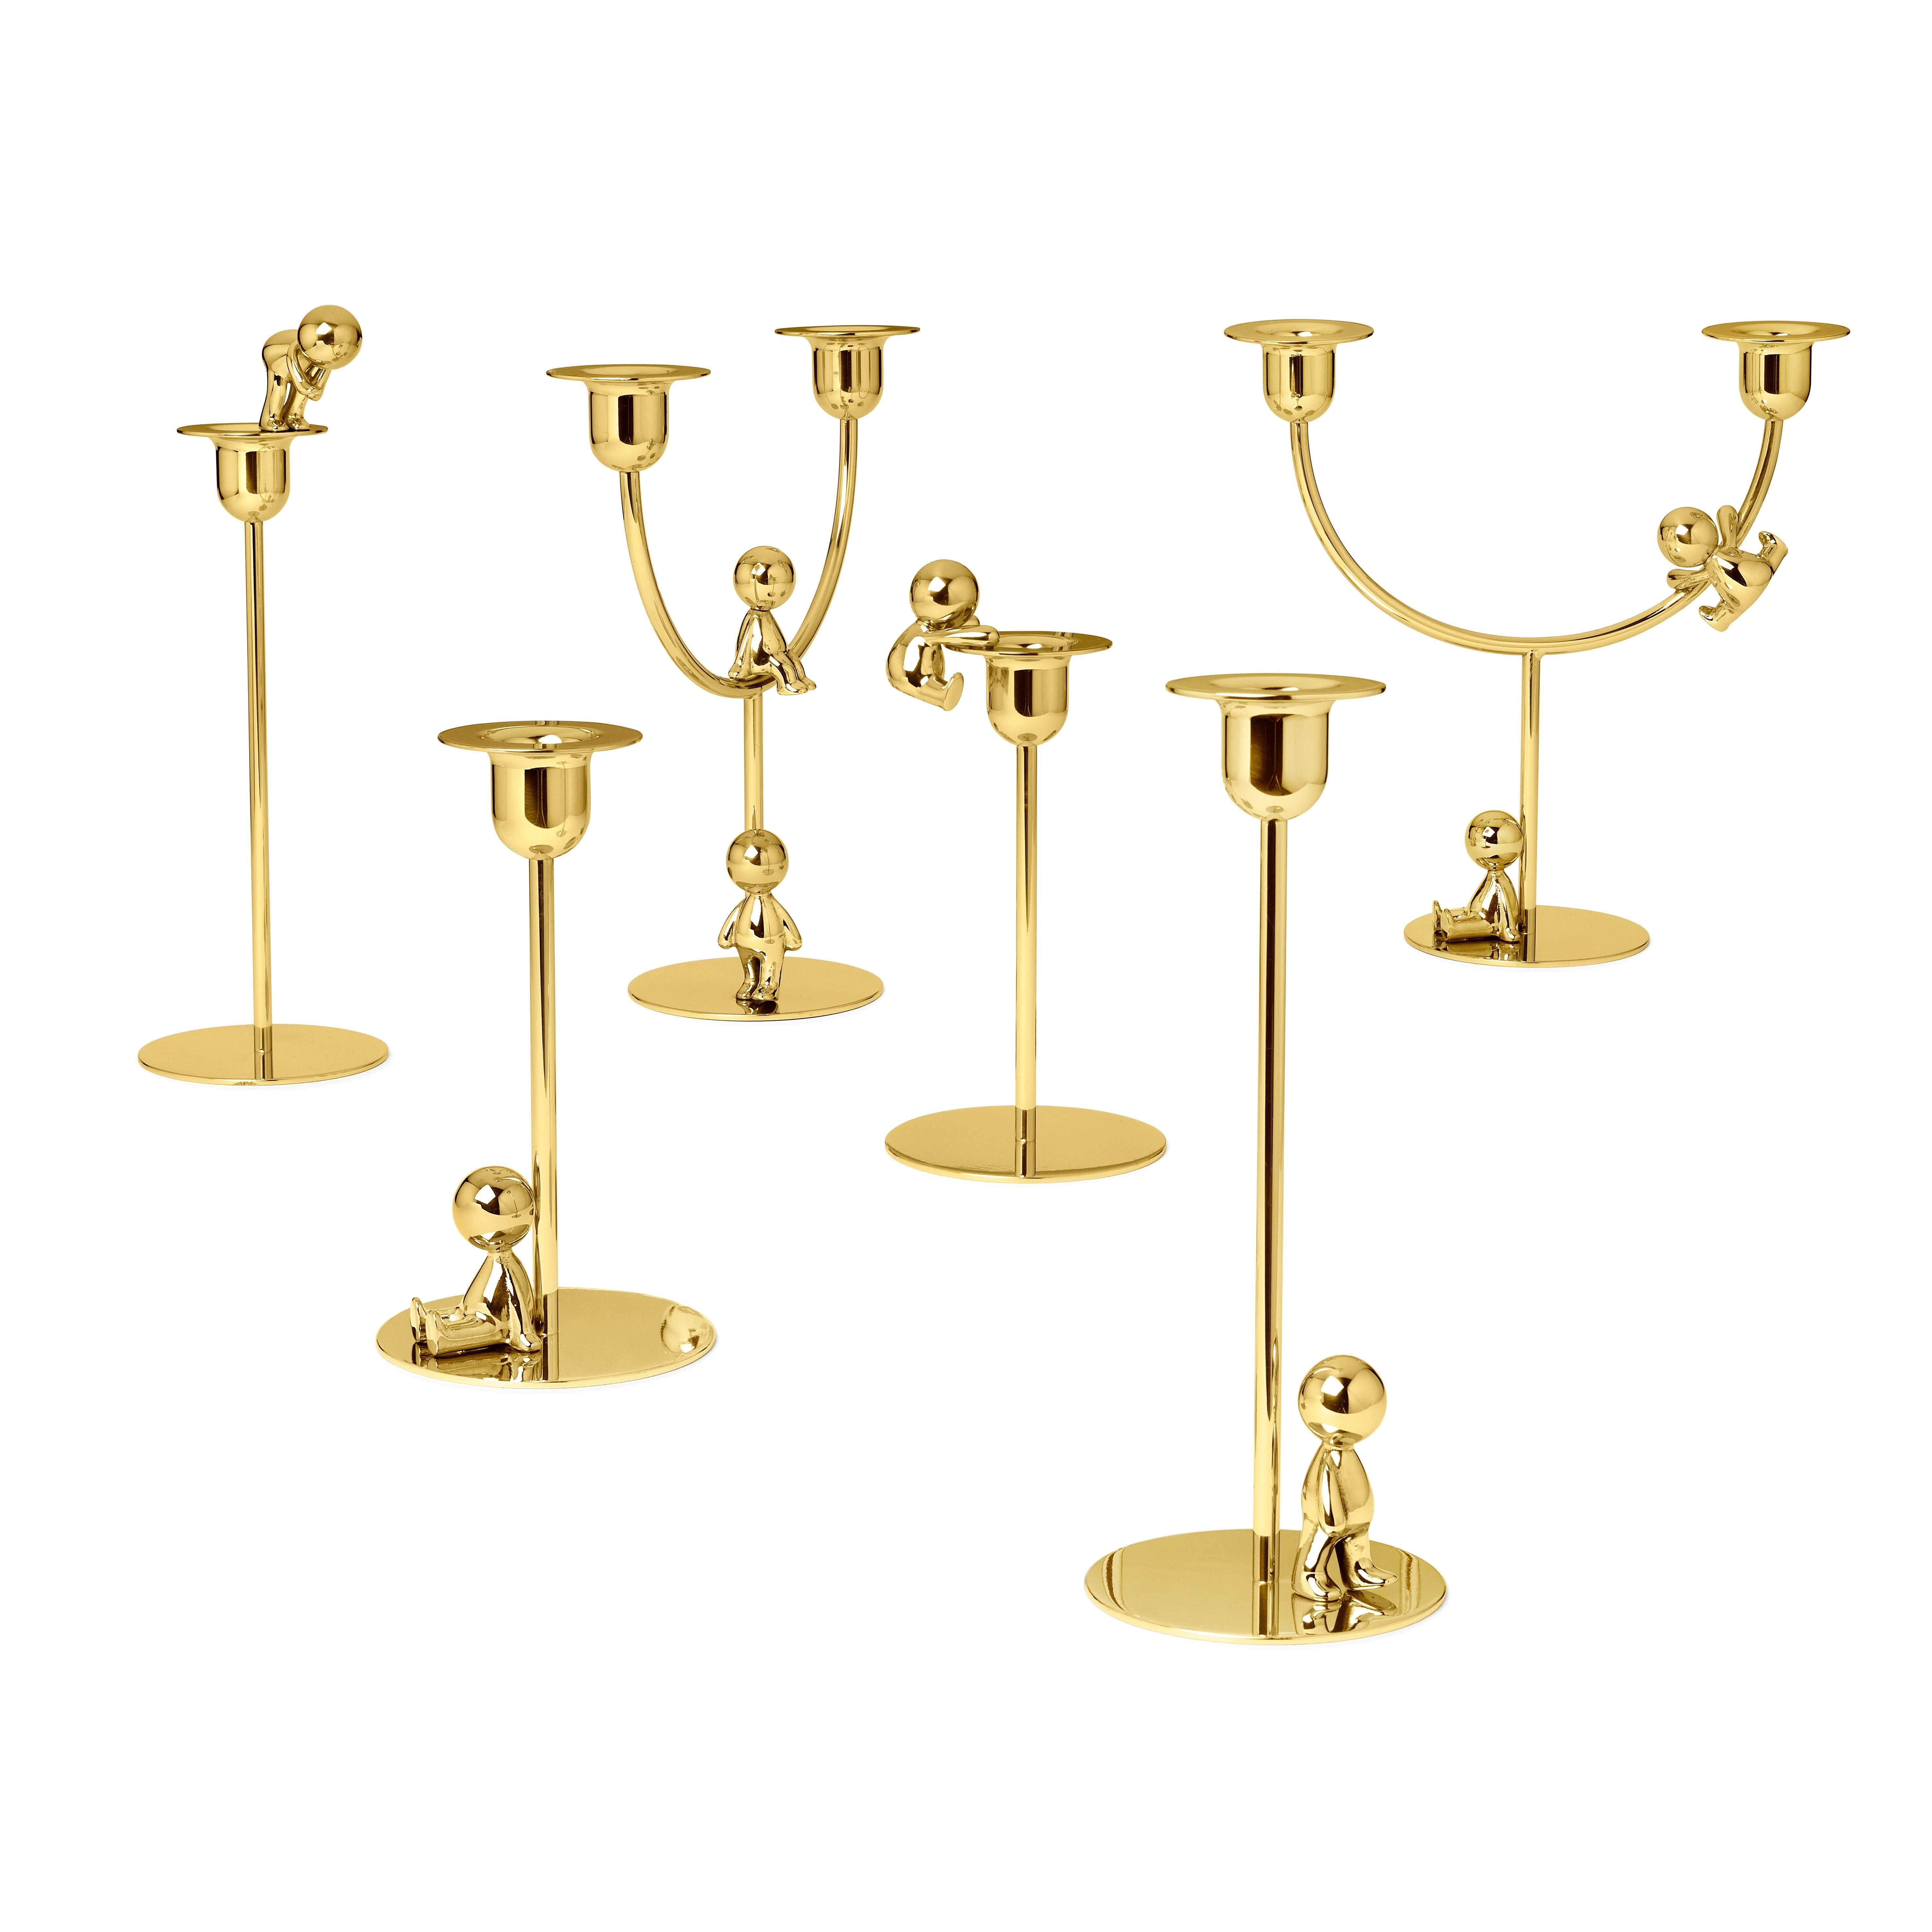 This delightful polished brass tall candlestick is a creative accent for any modern interior. Embodying classical allure and imaginative flair, this sleek candlestick is a stunning display for elegant taper candles. The piece has a distinctive